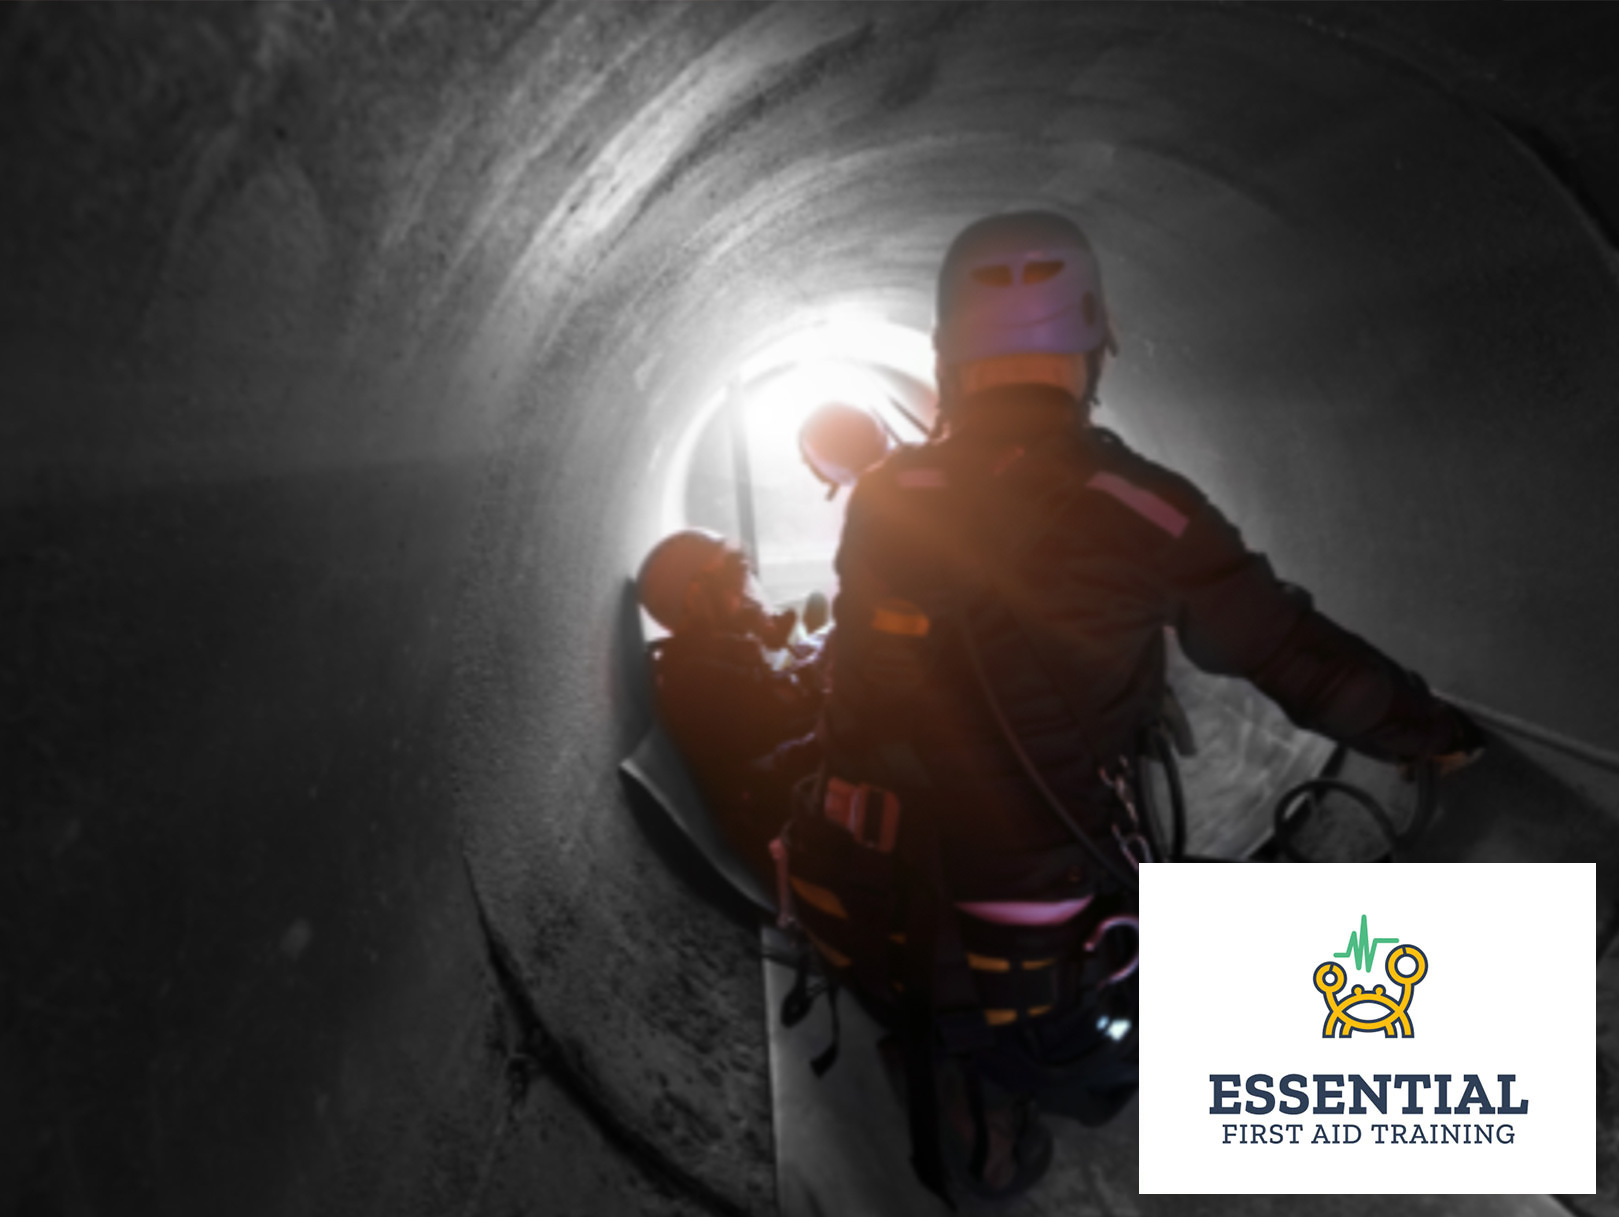 RIIWHS202E - Enter and work in confined spaces | Essential First Aid Training